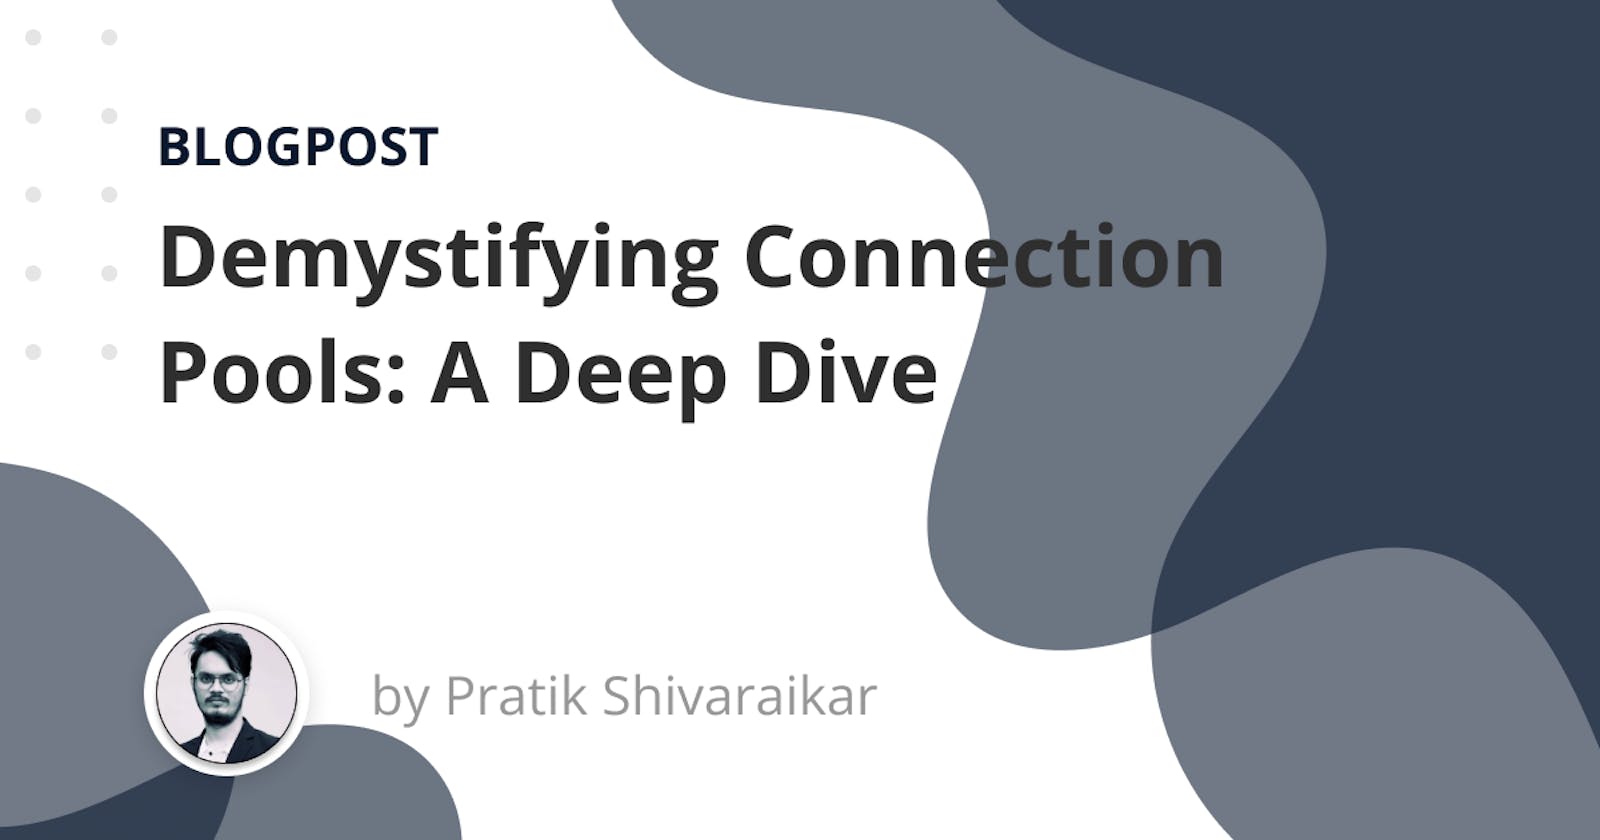 Demystifying Connection Pools: A Deep Dive